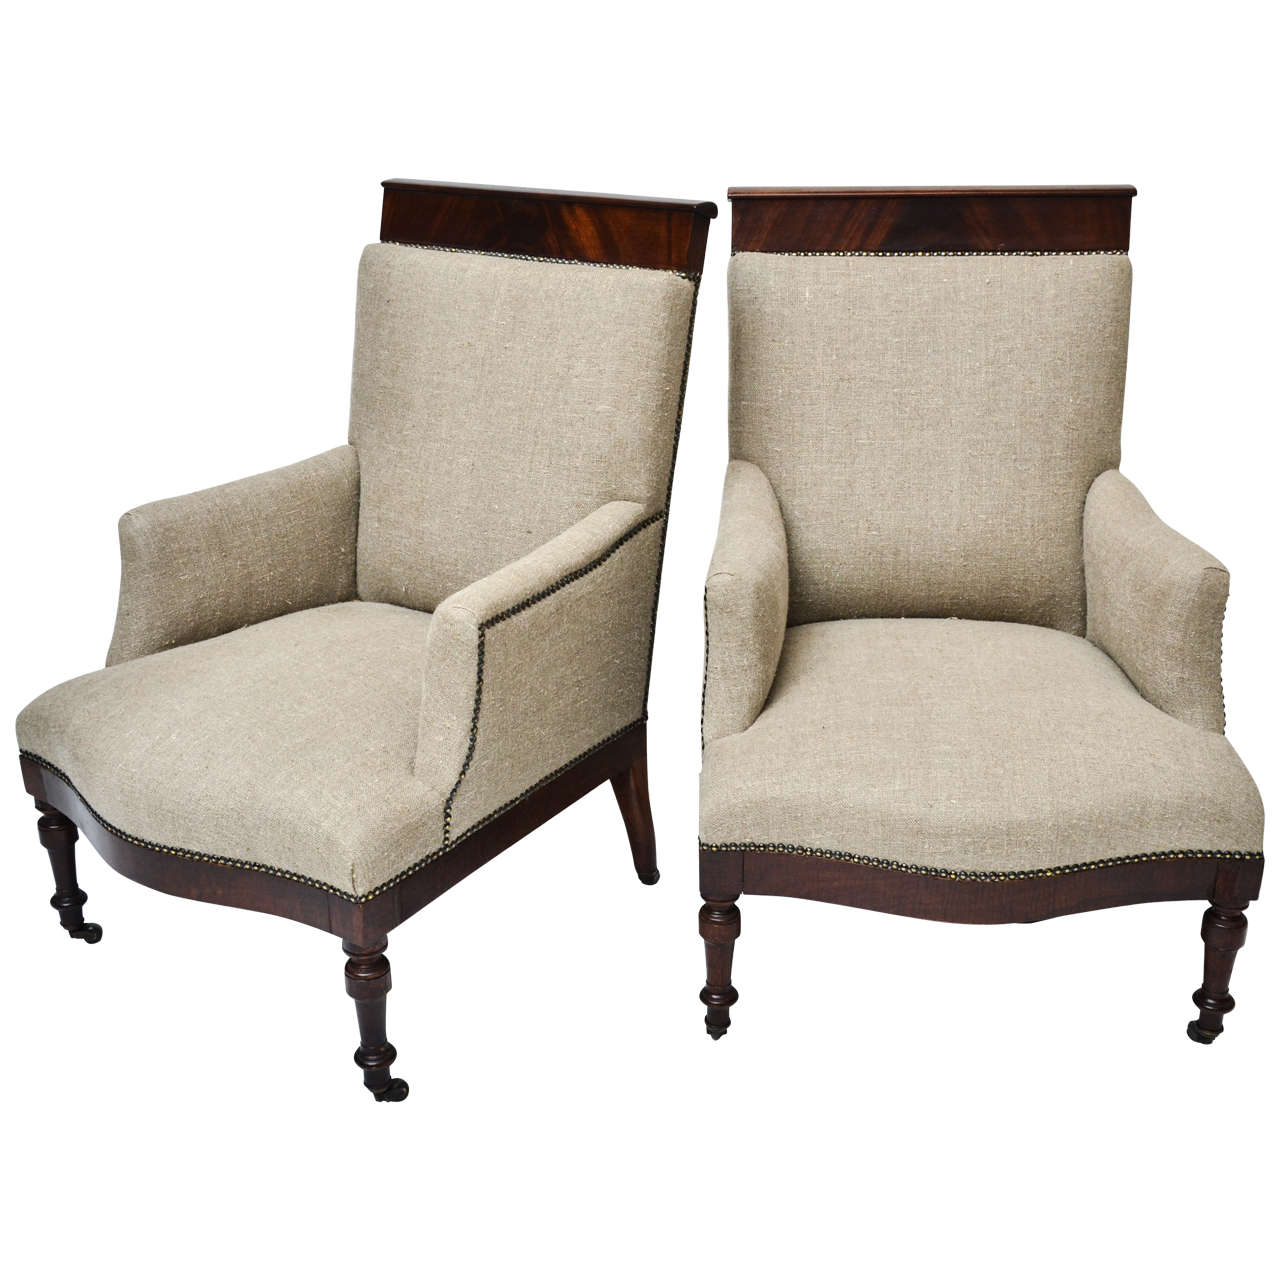 Pair of 19th Century English Upholstered Armchairs